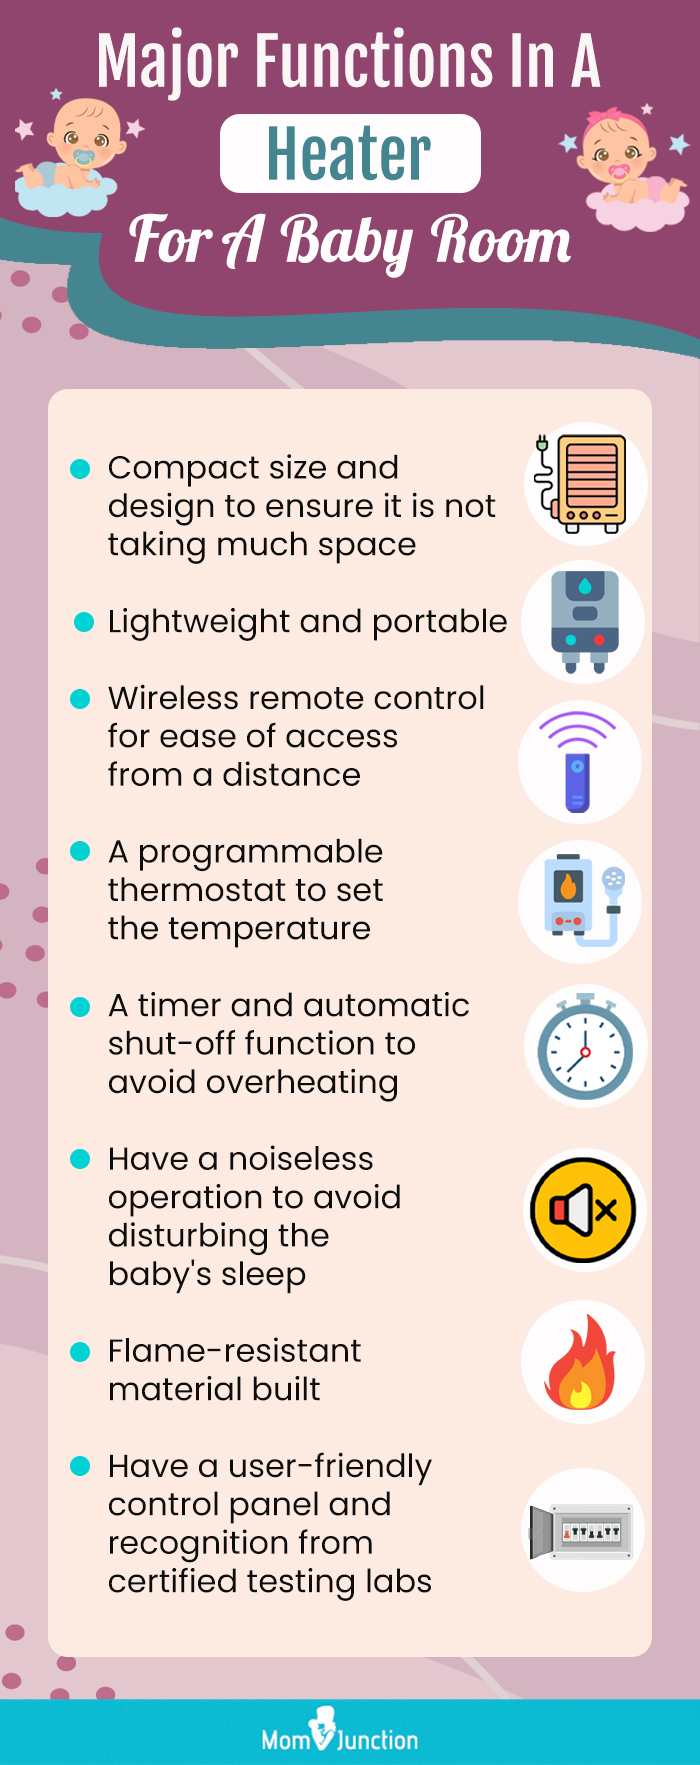 major functions in a heater for a baby room (infographic)